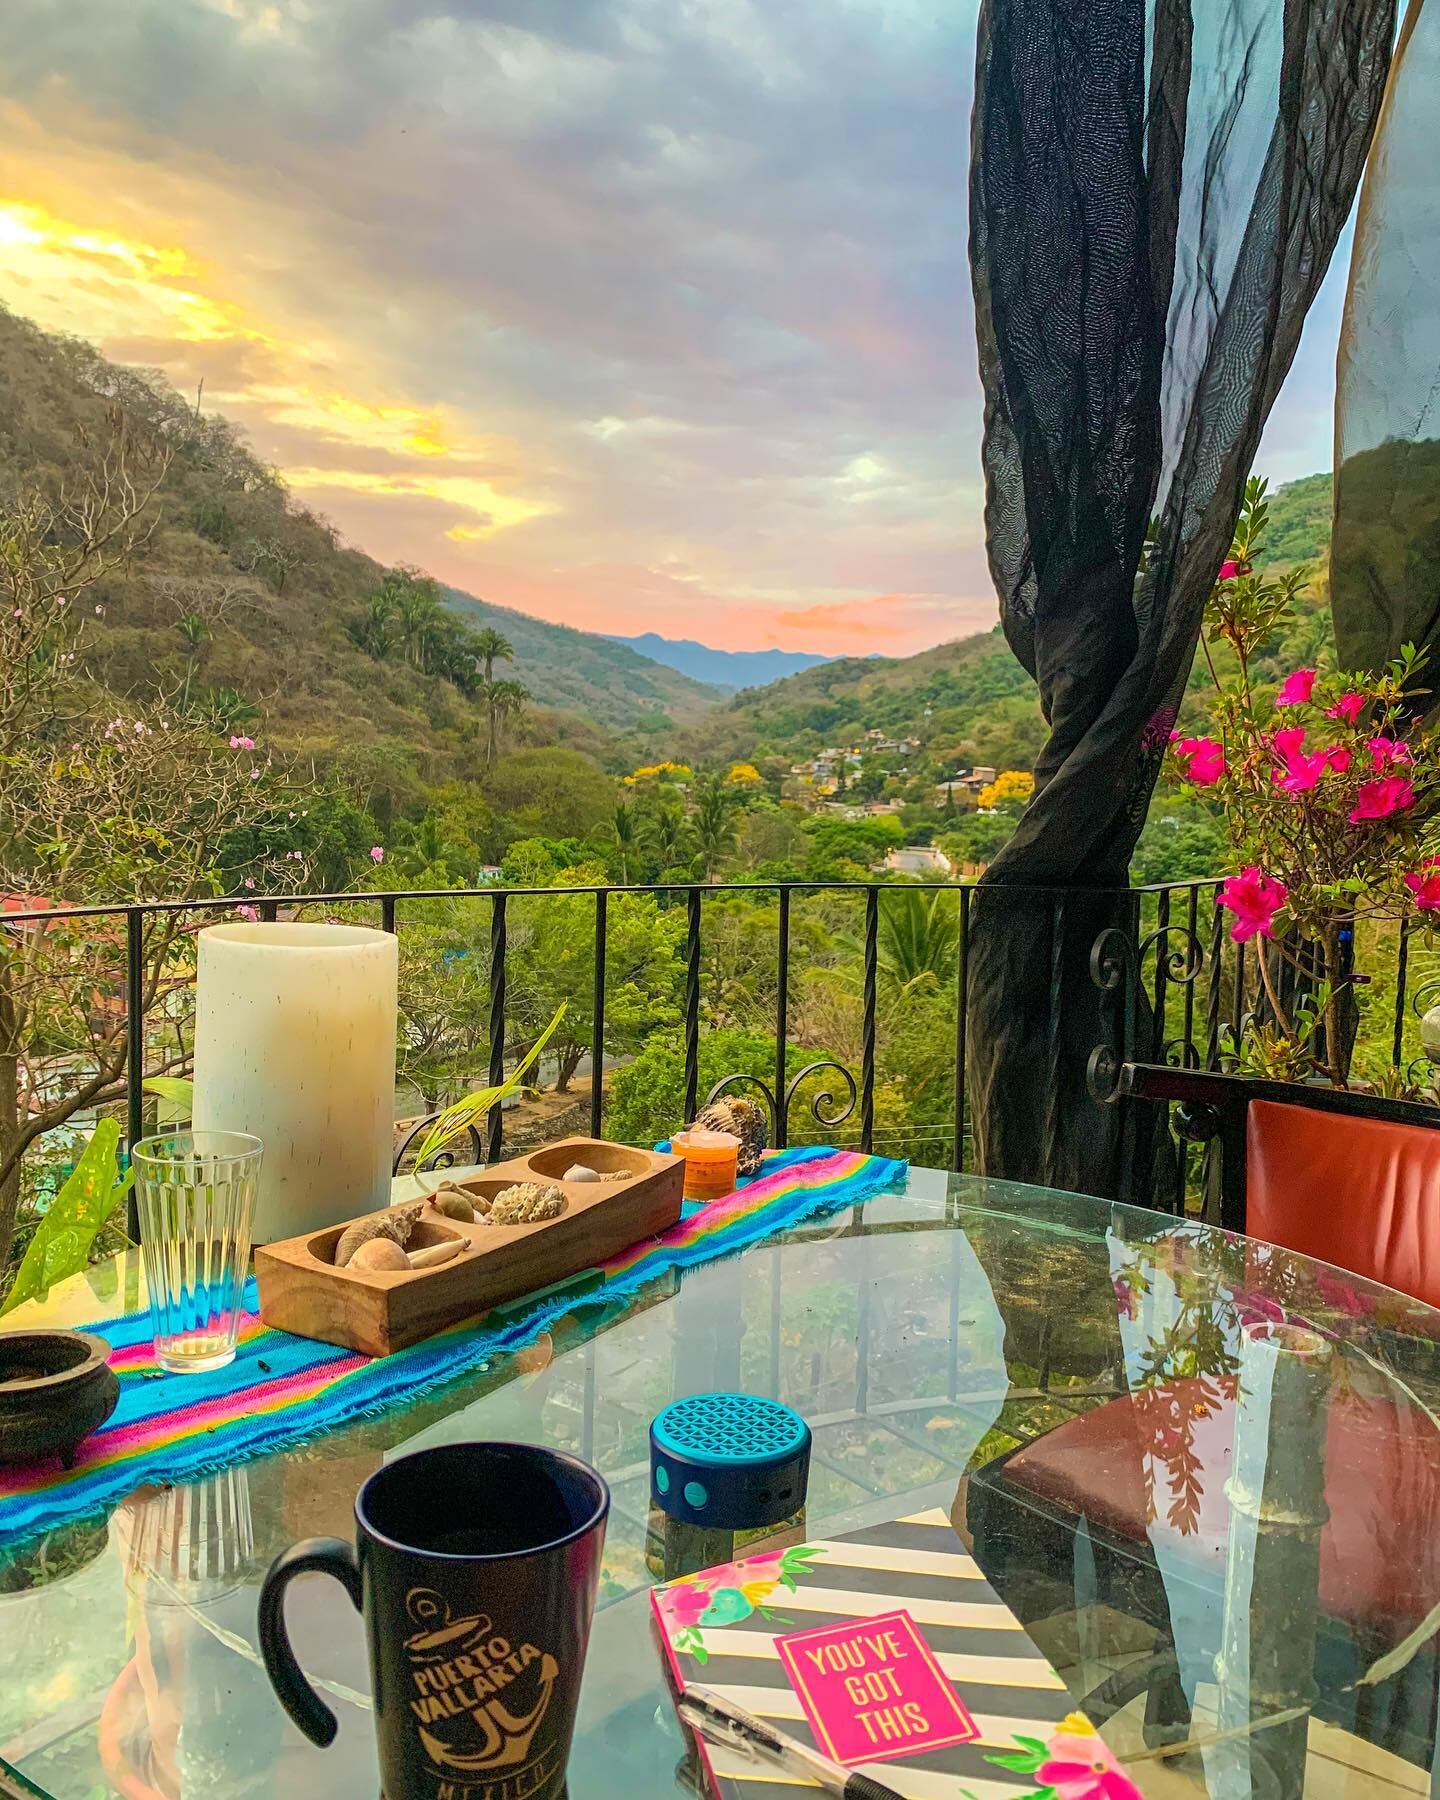 2 Jungle Apartments Next To River FOR RENT In PV

Apply in link in Bio. 

STATUS: Available Now

Apartment Details:

Jungle-style living

Large panoramic windows protect from rain

Beautiful mountain + jungle views

Full kitchen

Open terrace

No AC
